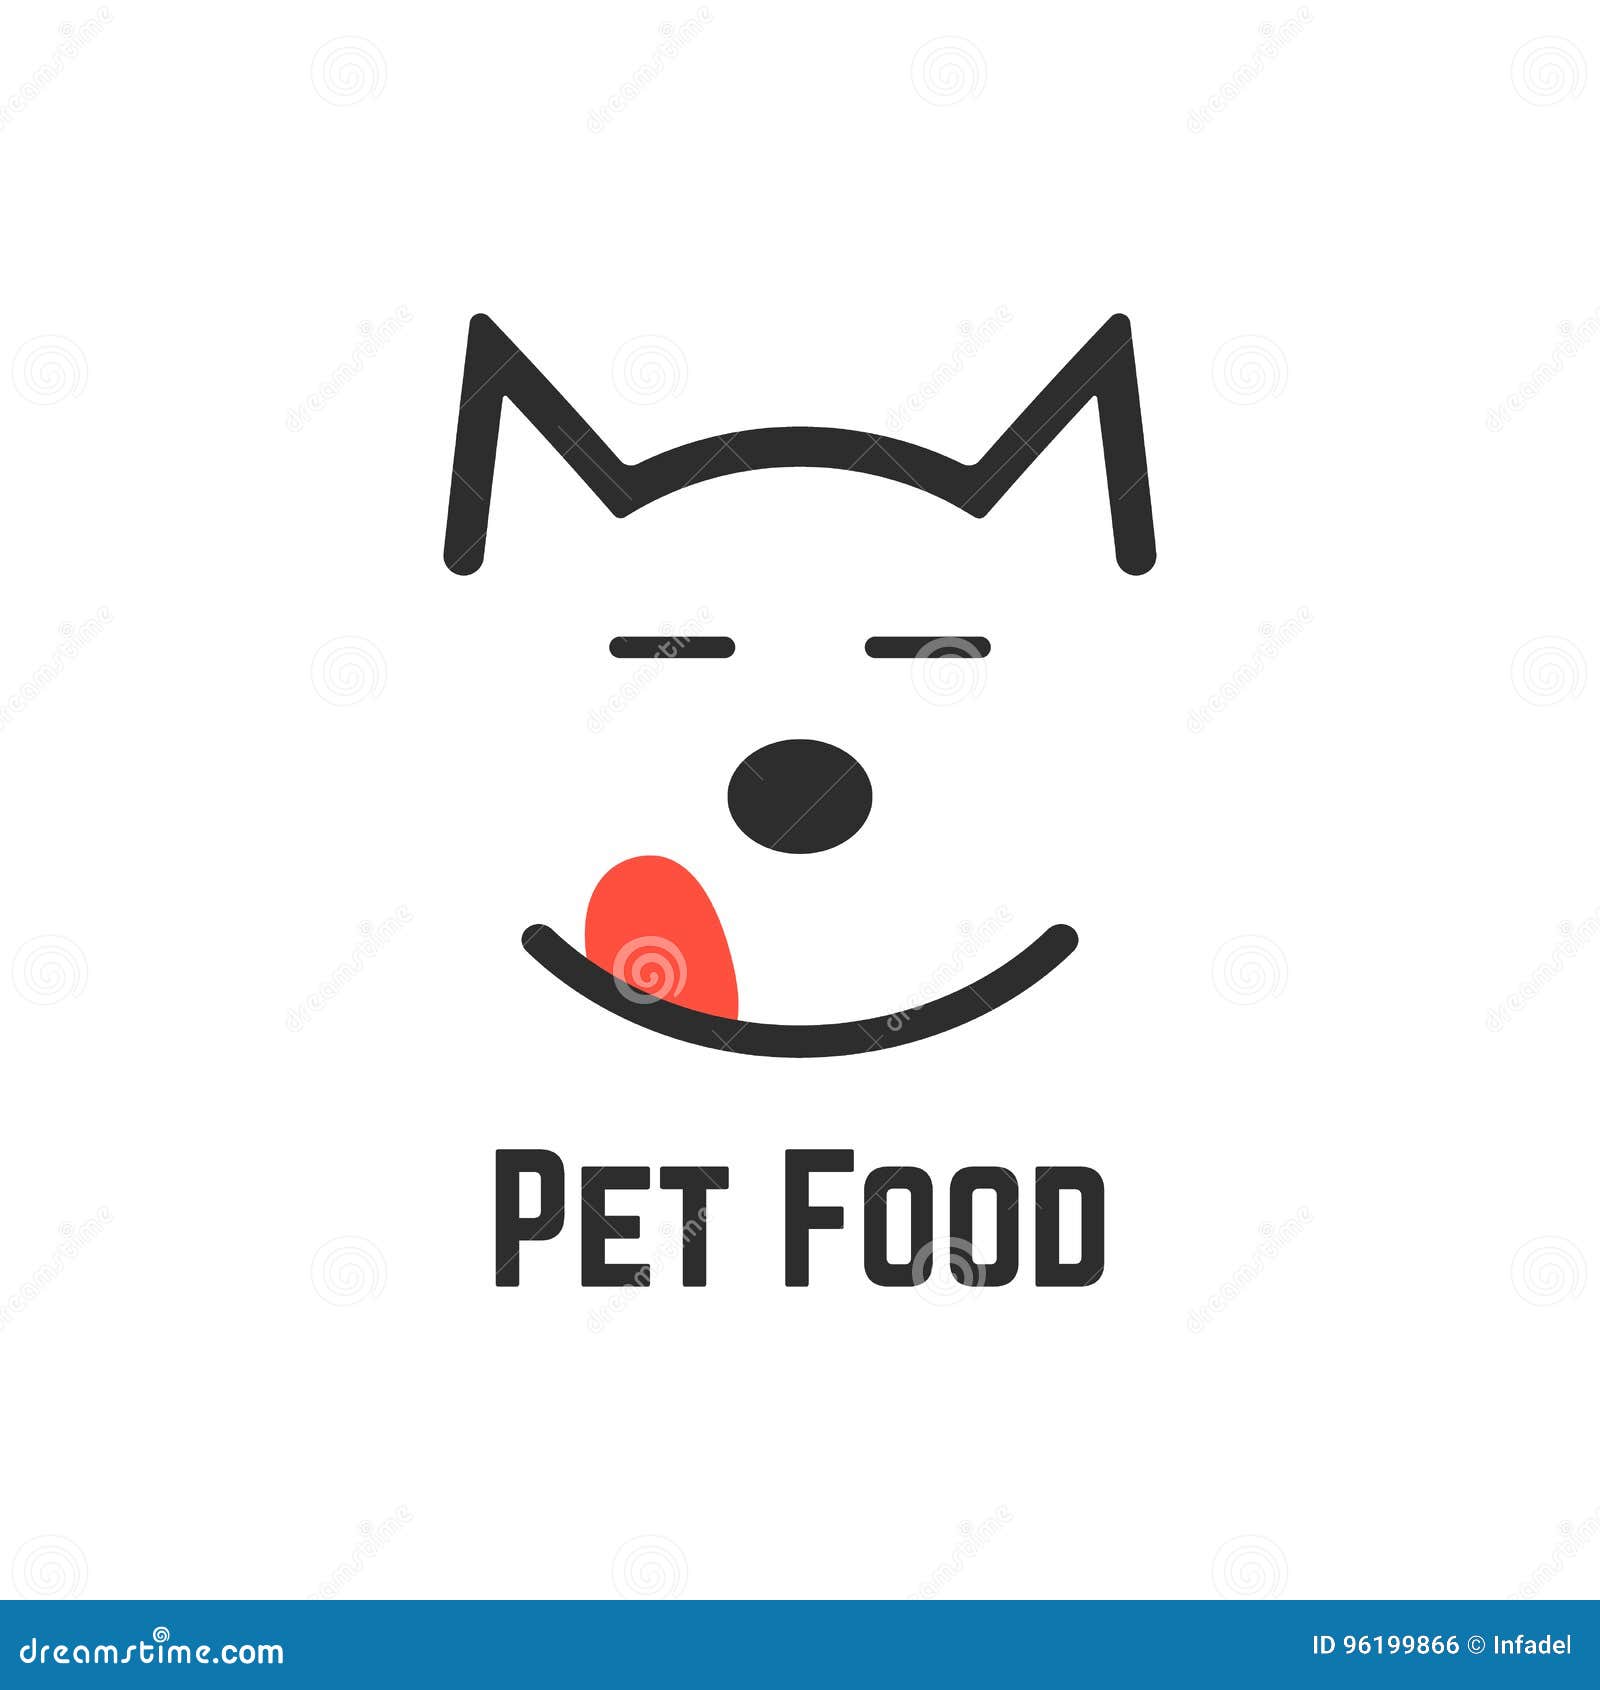 Pet Food Logo With Dog Icon Stock Vector Illustration Of Face Flat